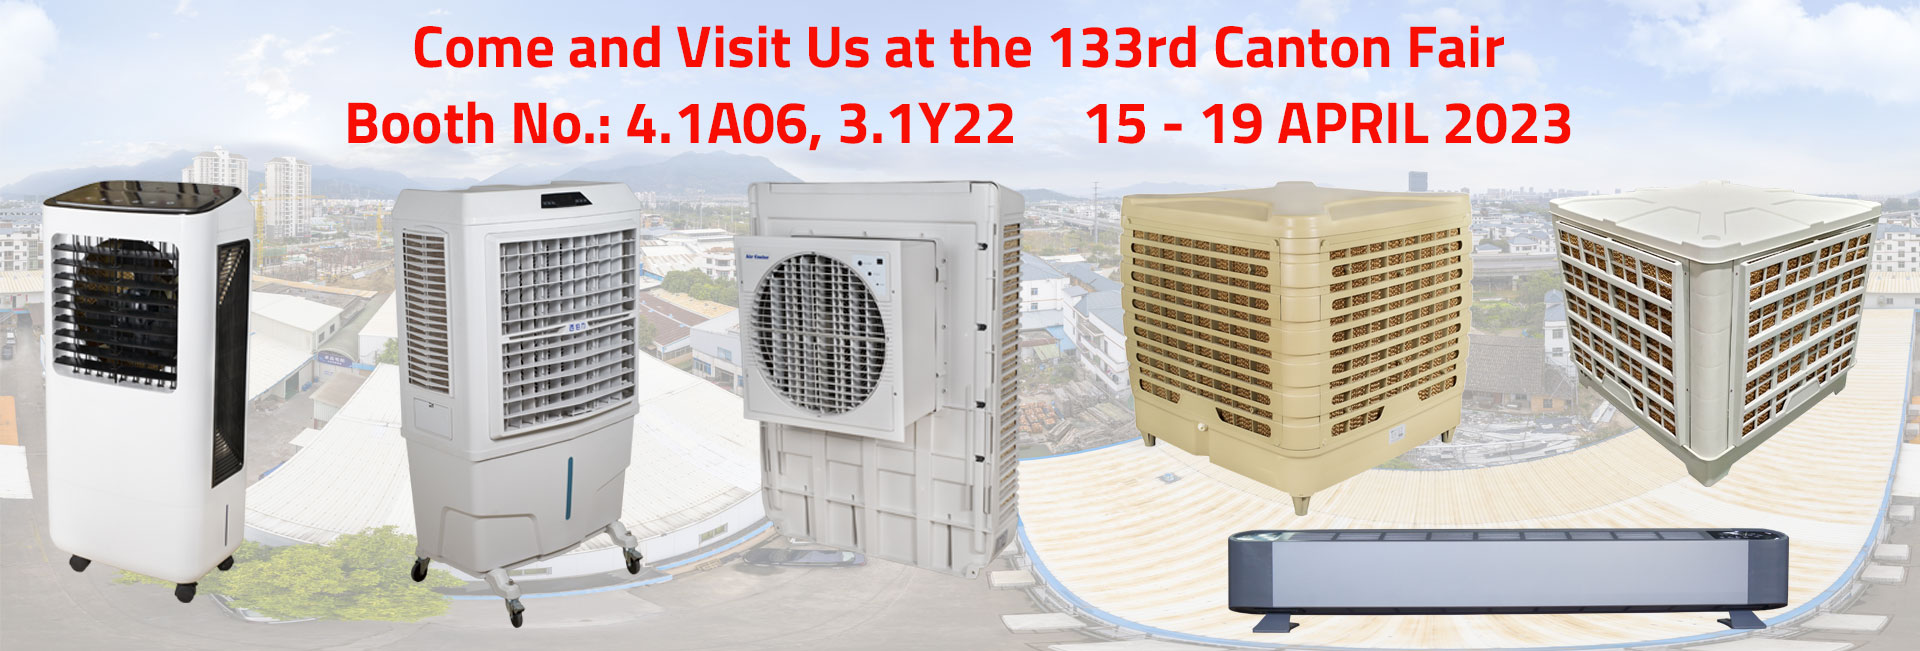 Come and Visit Us at the 133rd Canton Fair